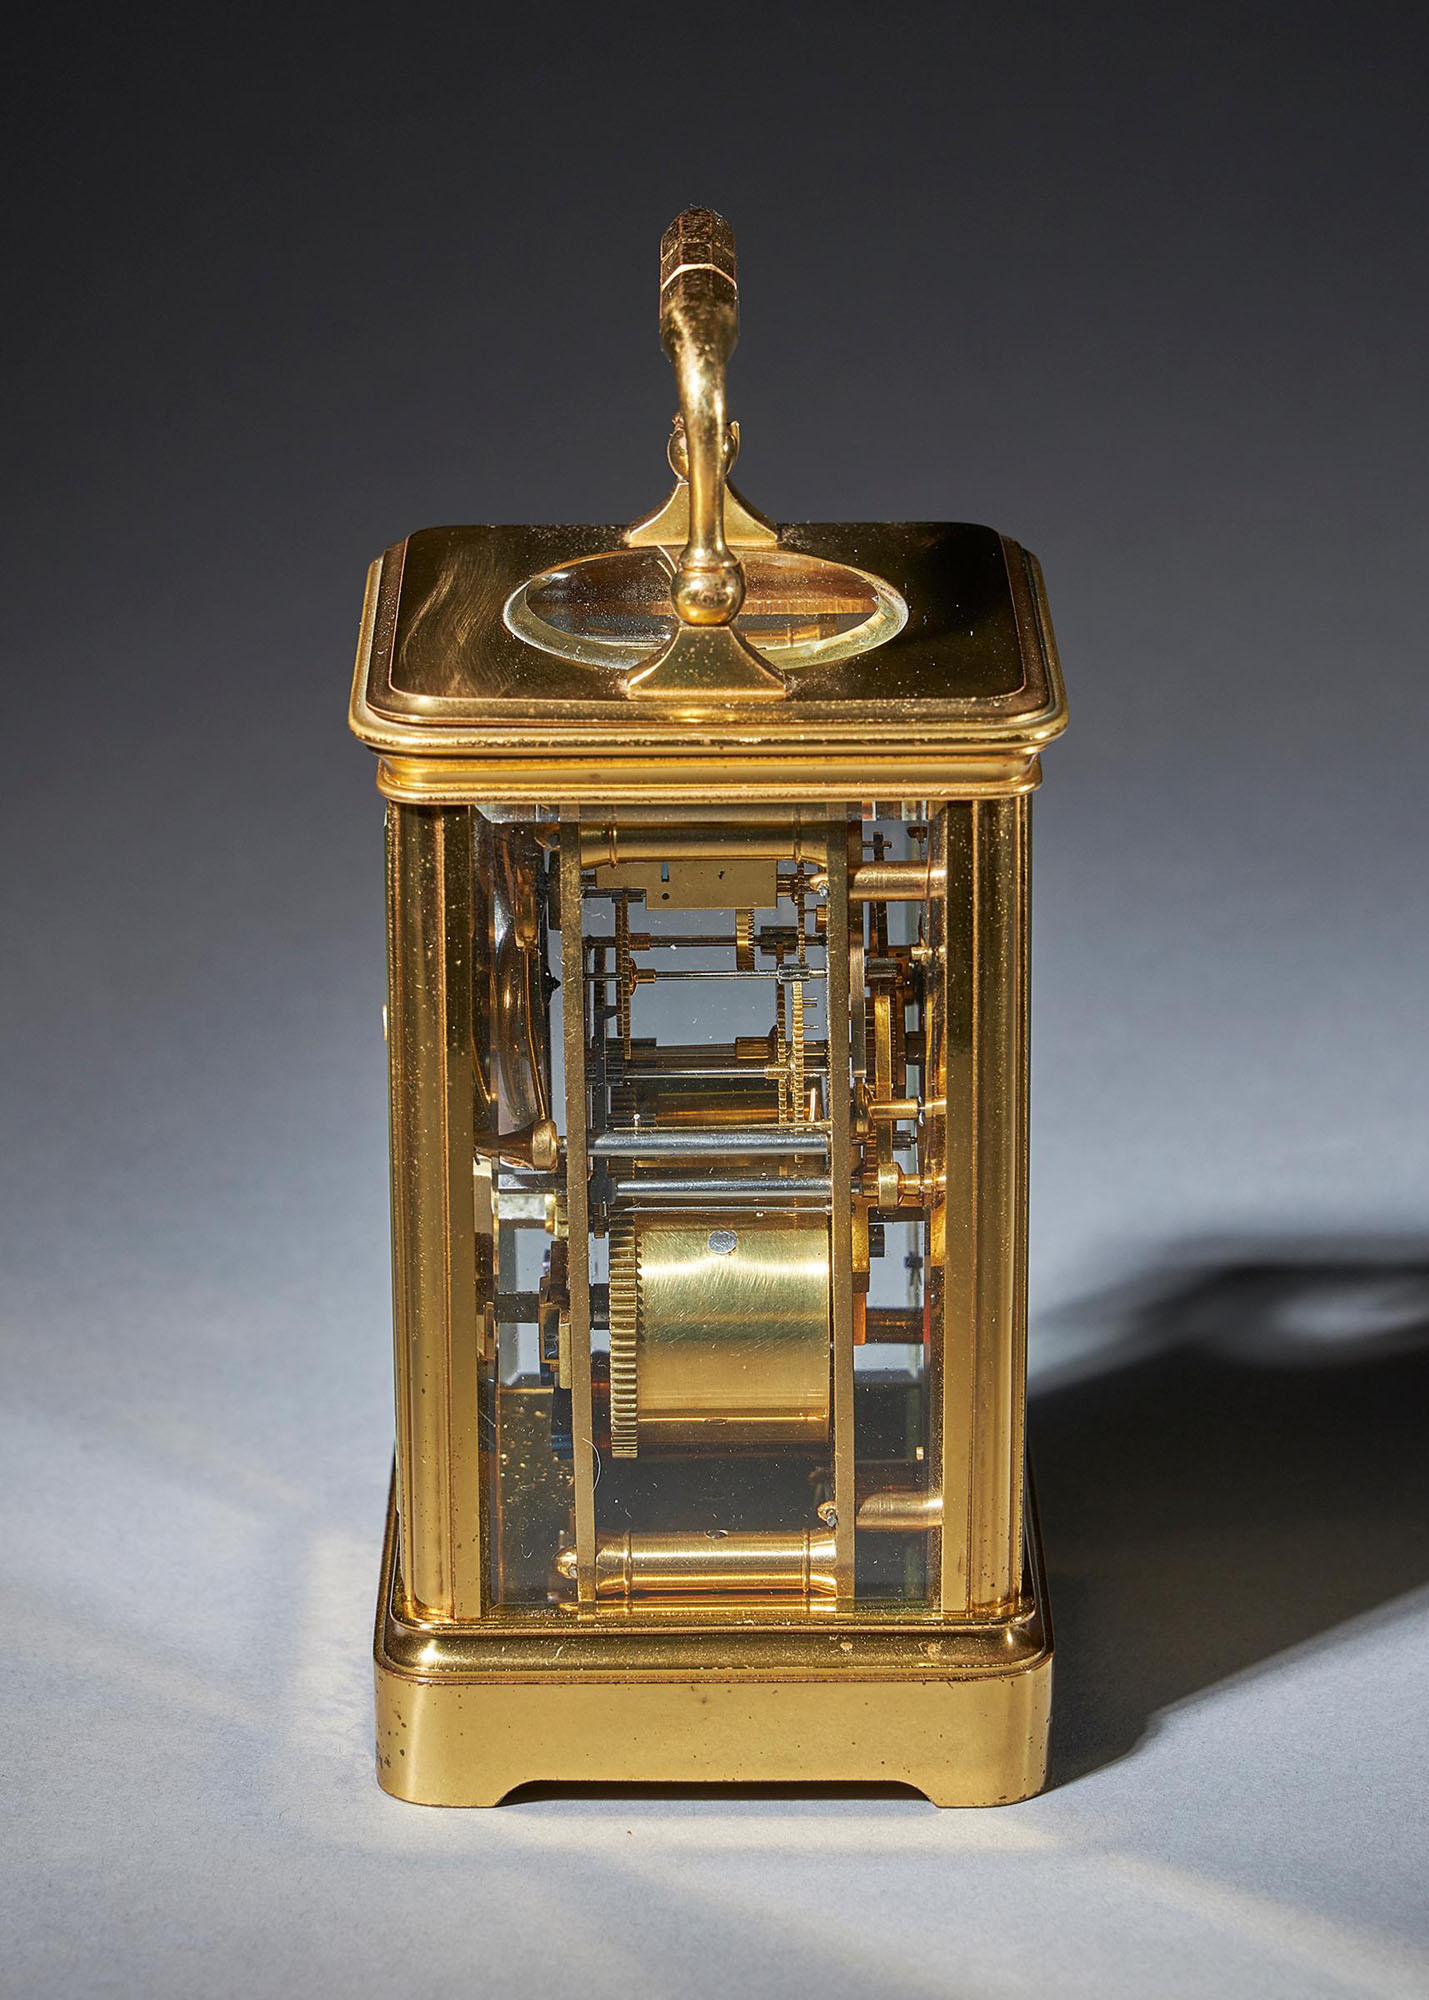 Striking 19th Century Carriage Clock with a Gilt-Brass Corniche Case by Grohé 5